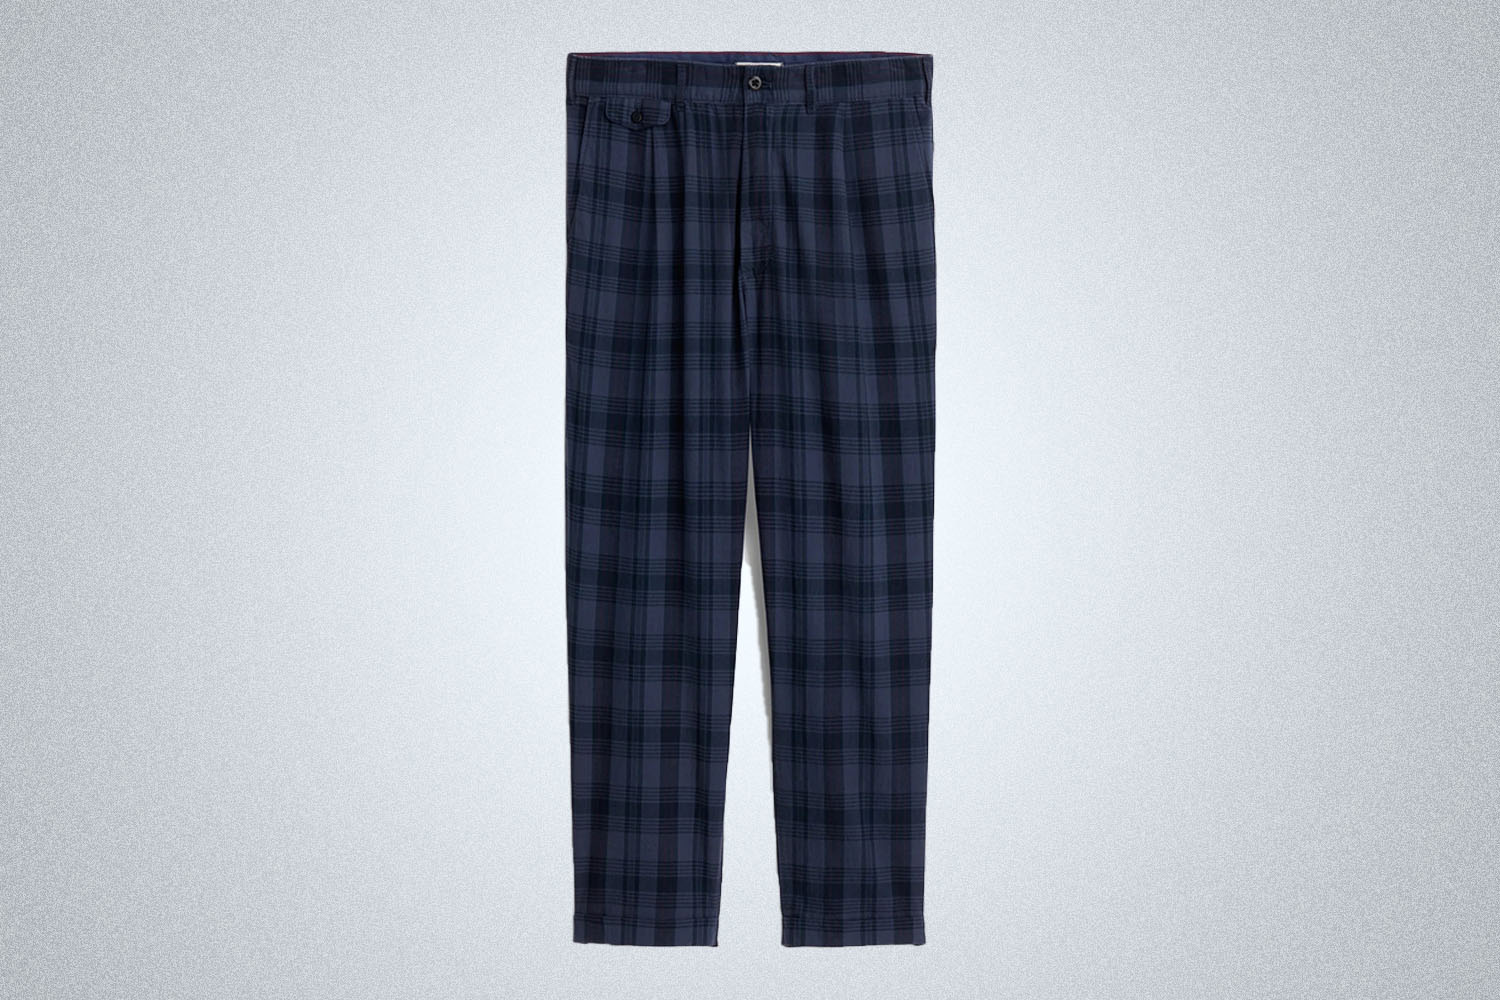 a pair of Alex mill madras pleated pants on a grey background